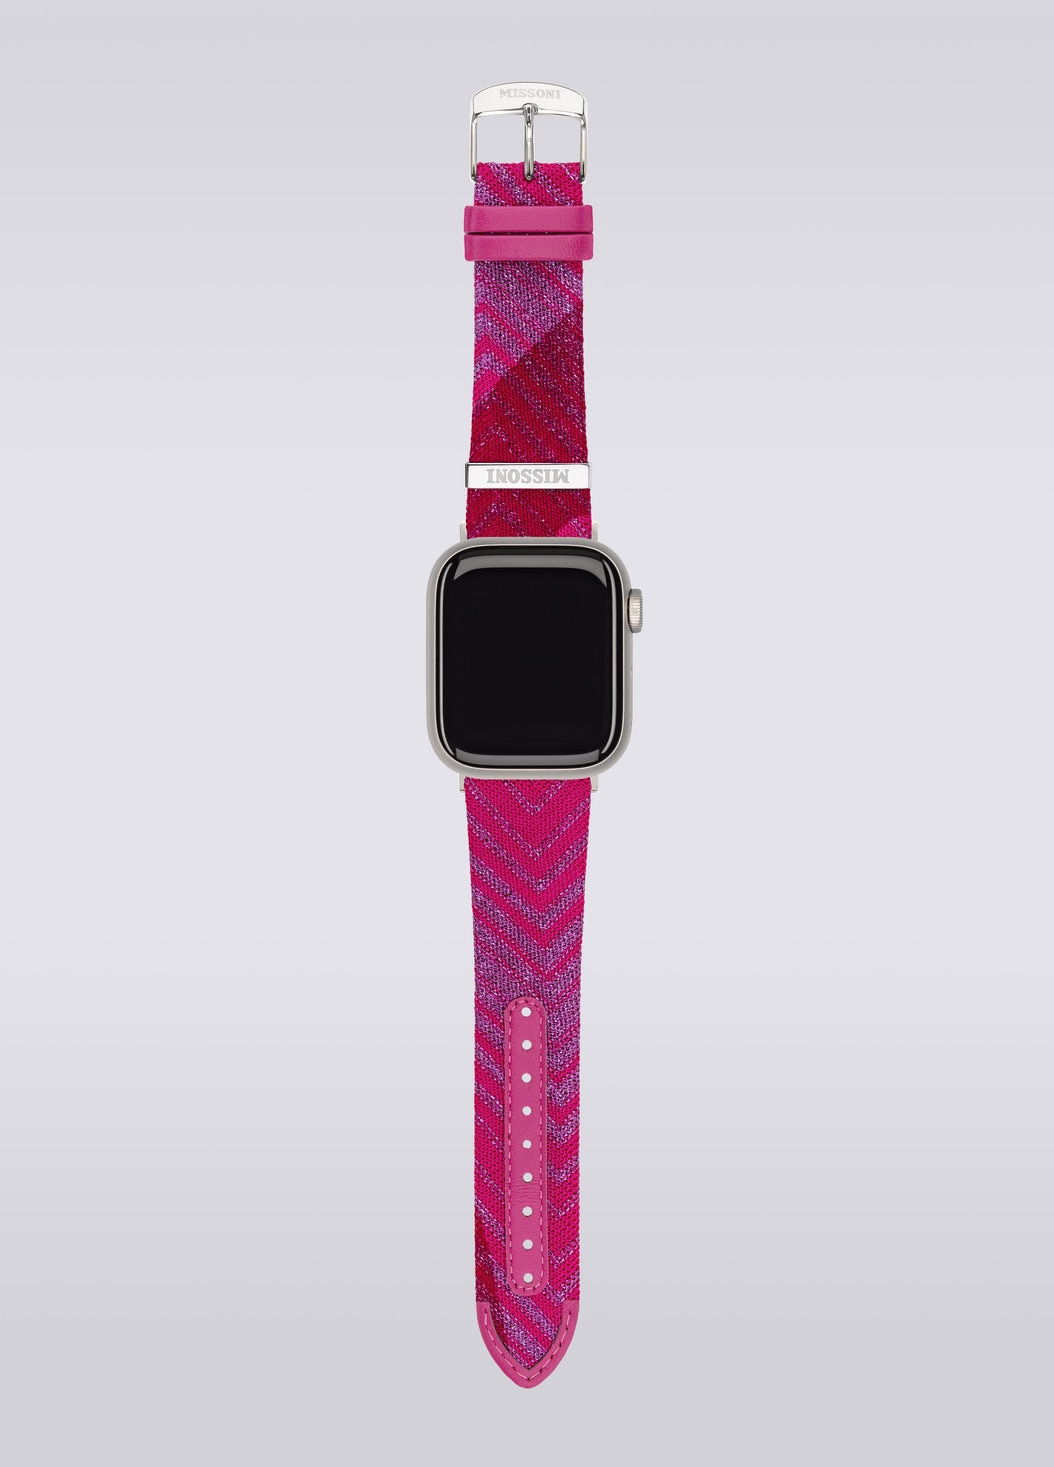 Missoni Fabric 22 mm Apple watch compatible strap, Pink   - 8053147046204 - 3